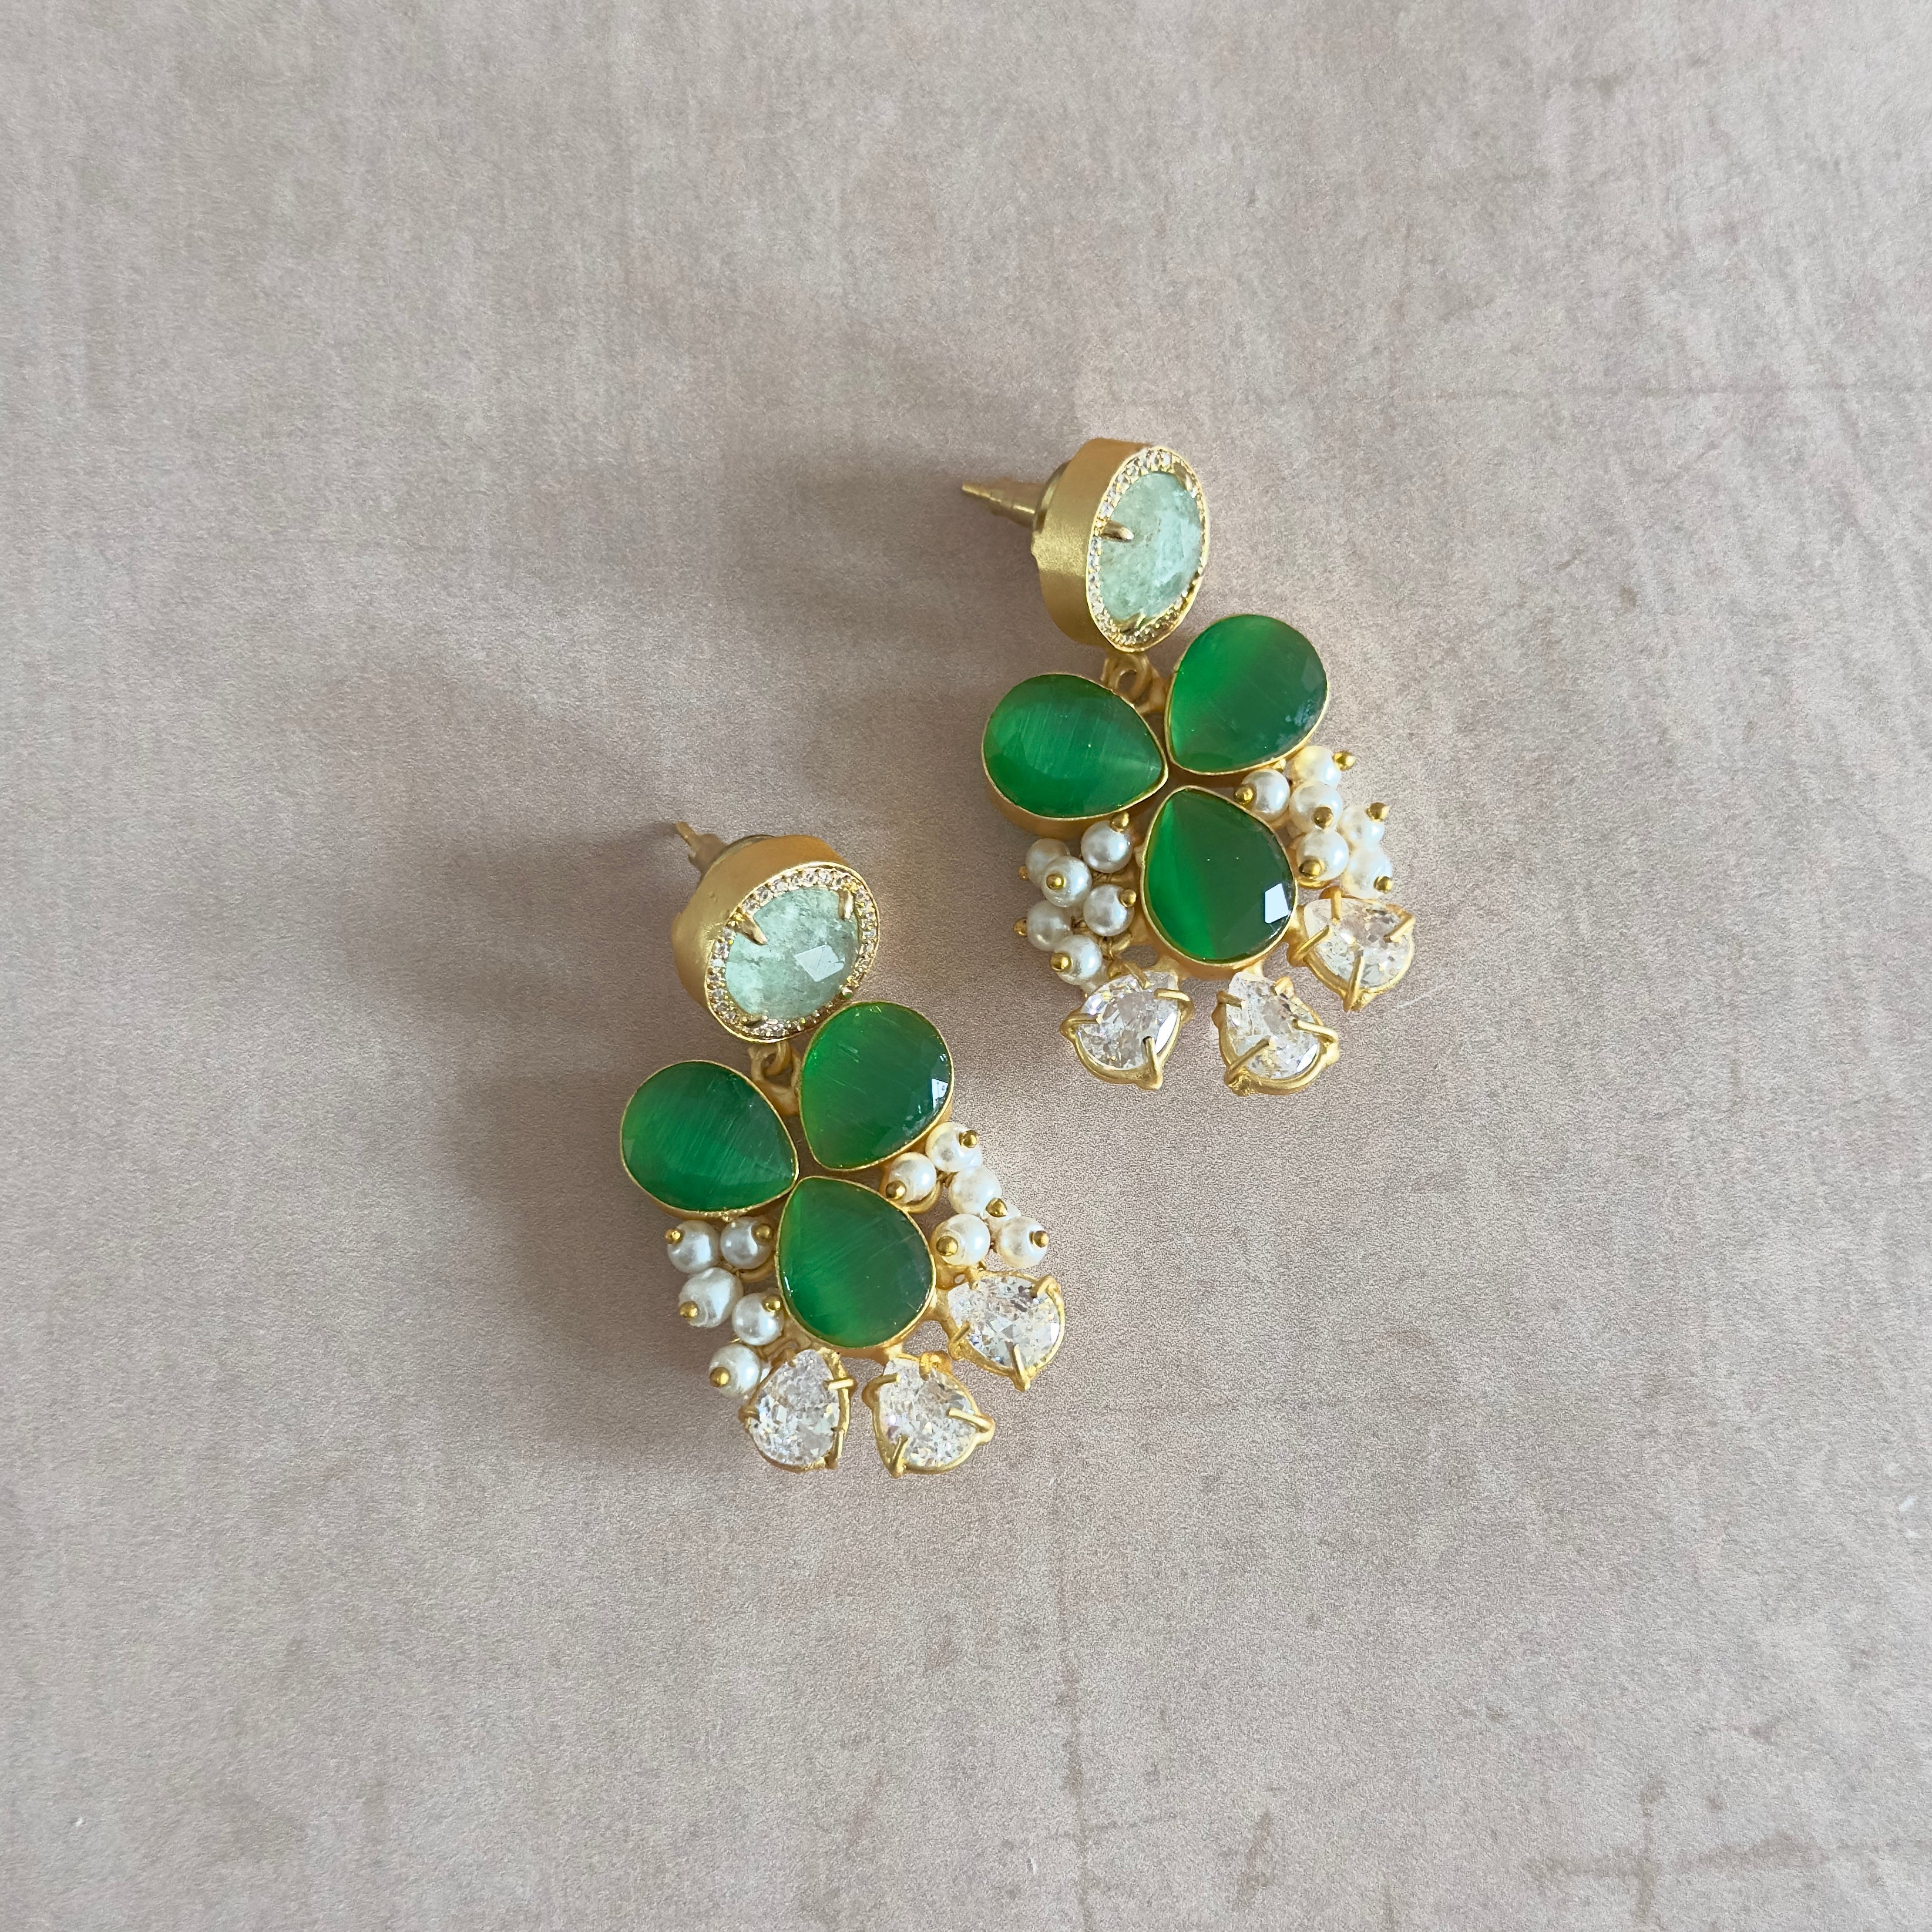 Elevate your style with the stunning Sirena Green Stud Earrings! These earrings feature mesmerizing vibrant hues of green and aquamarine, accentuated with sparkling cubic zirconia. Perfect for any occasion.